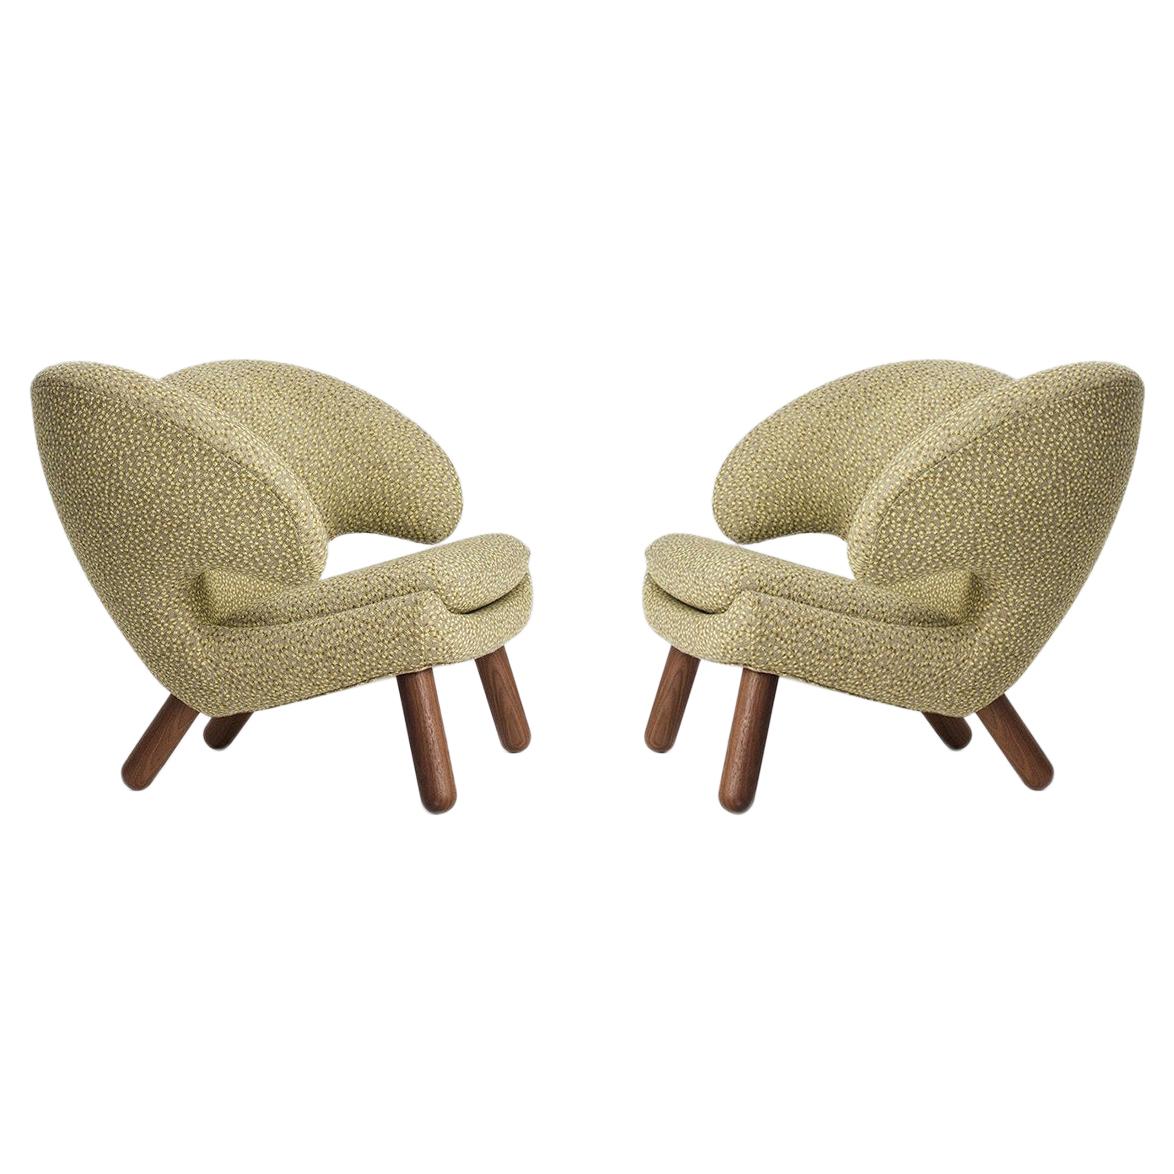 Set of Two Pelican Chairs Upholstered in Raf Simons Fabric by Finn Juhl